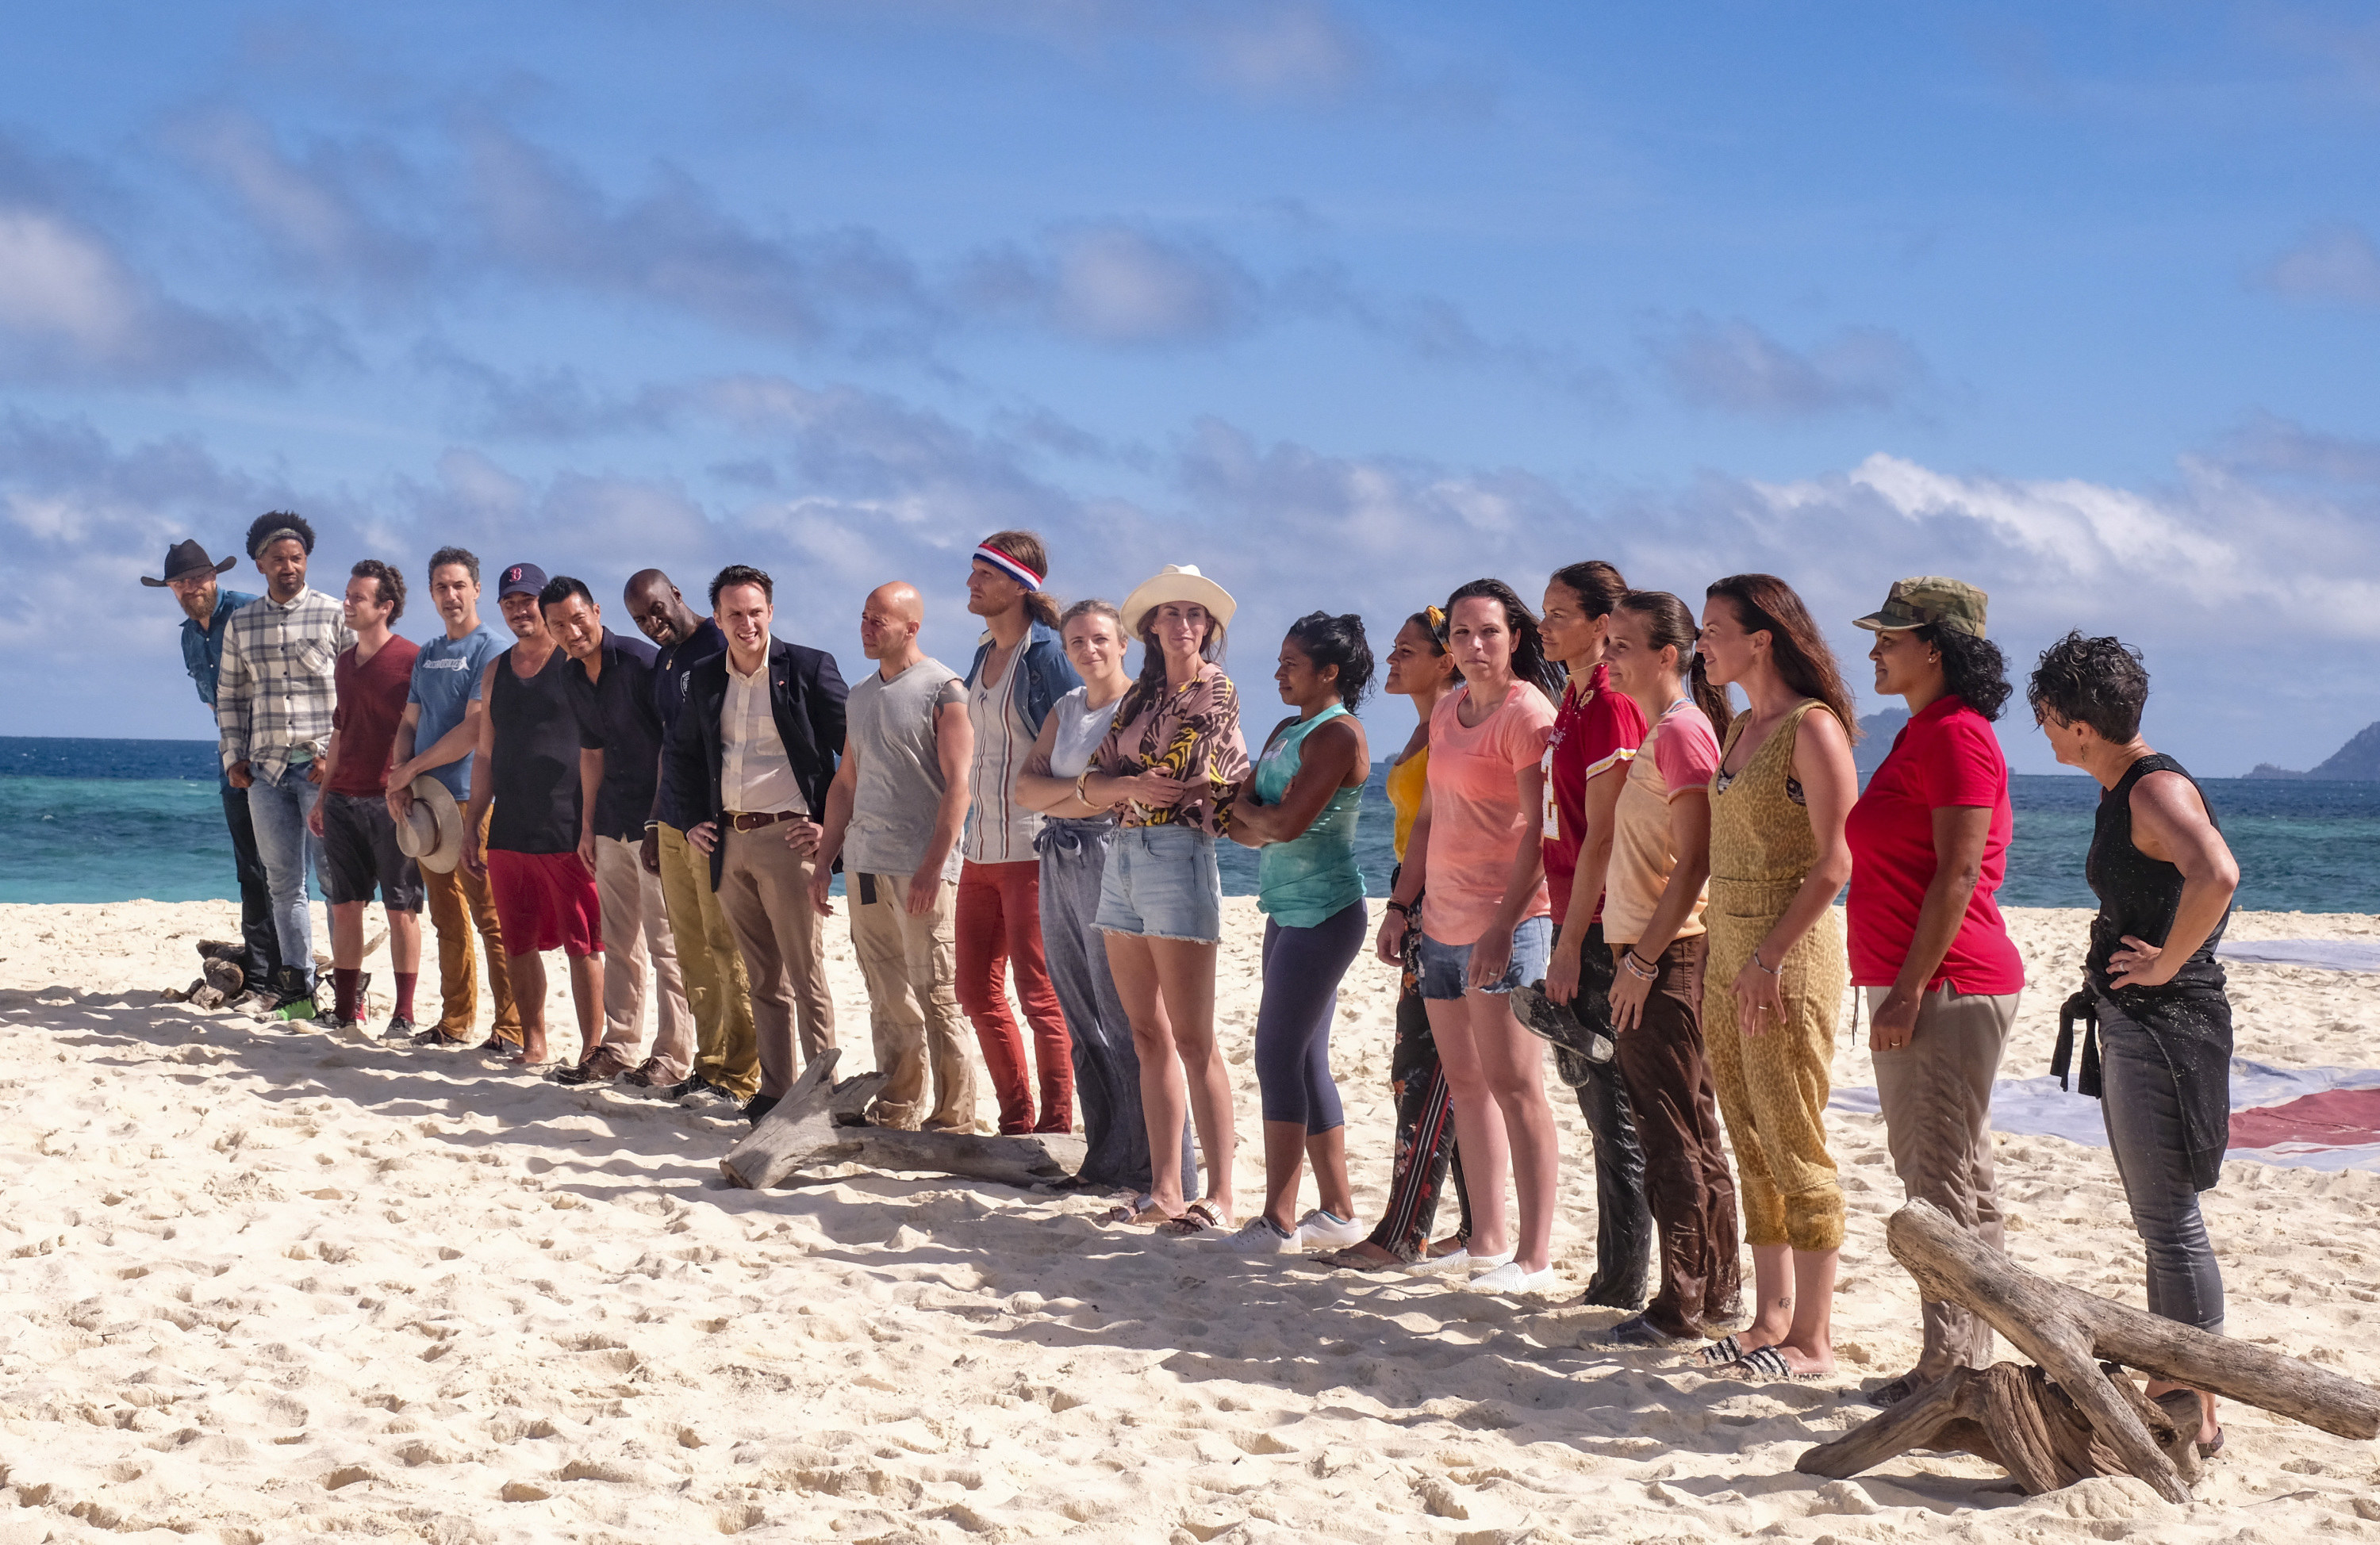 20 former winners stand on a beach together